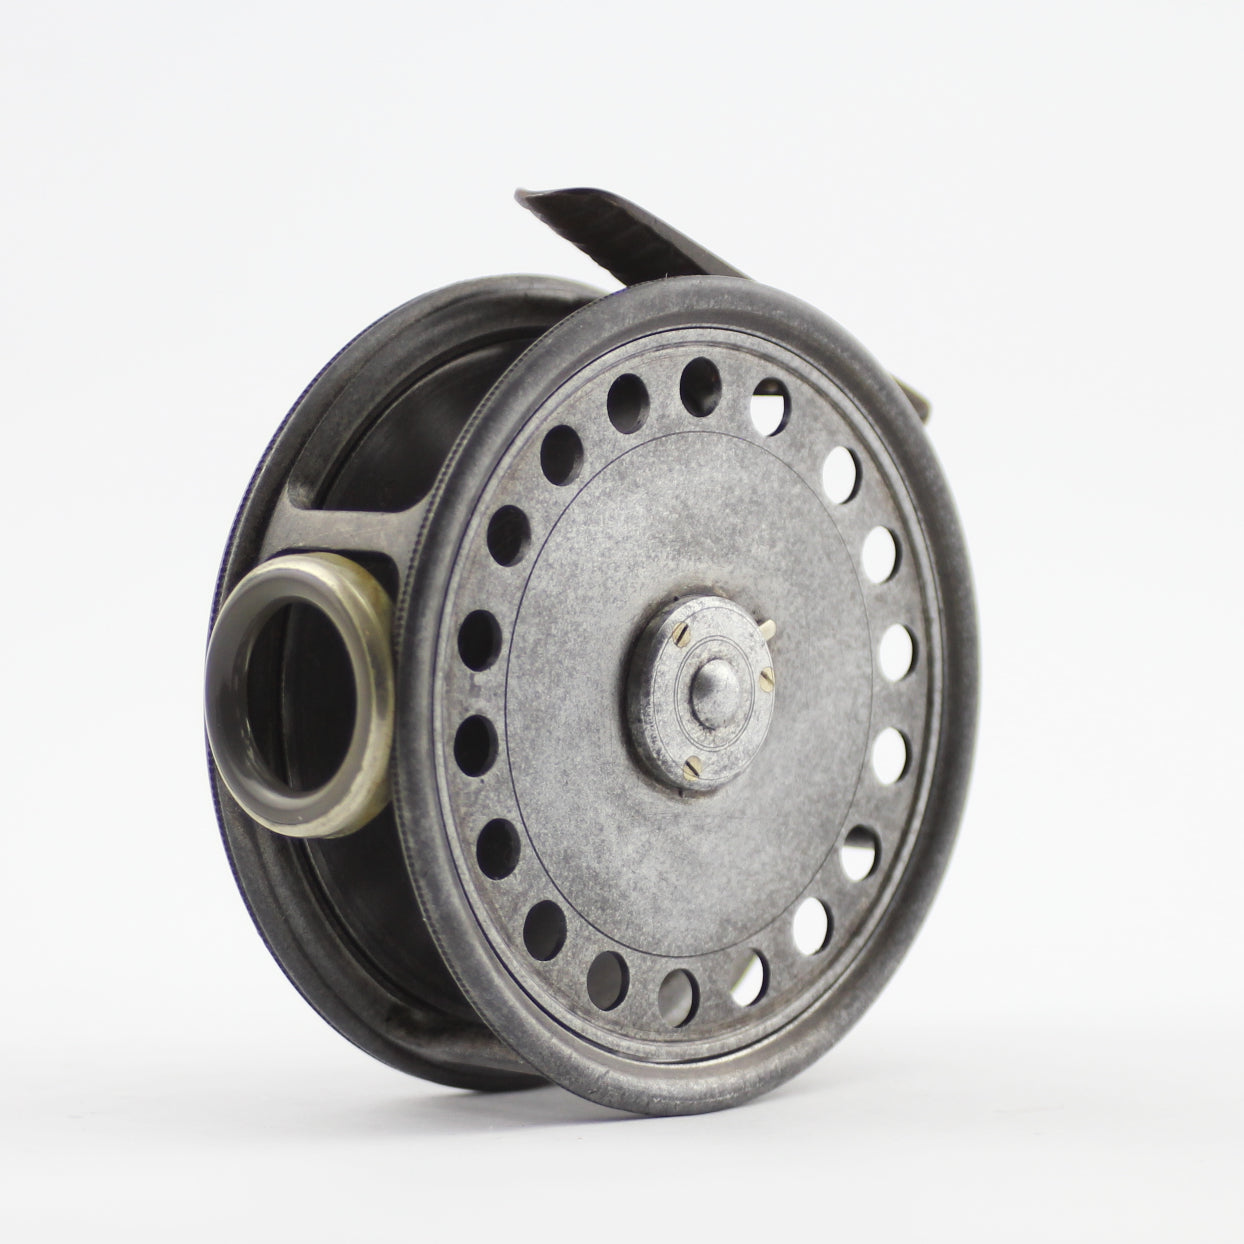 The Hardy Barton Dry Fly Fishing Reel - a rare reel for the